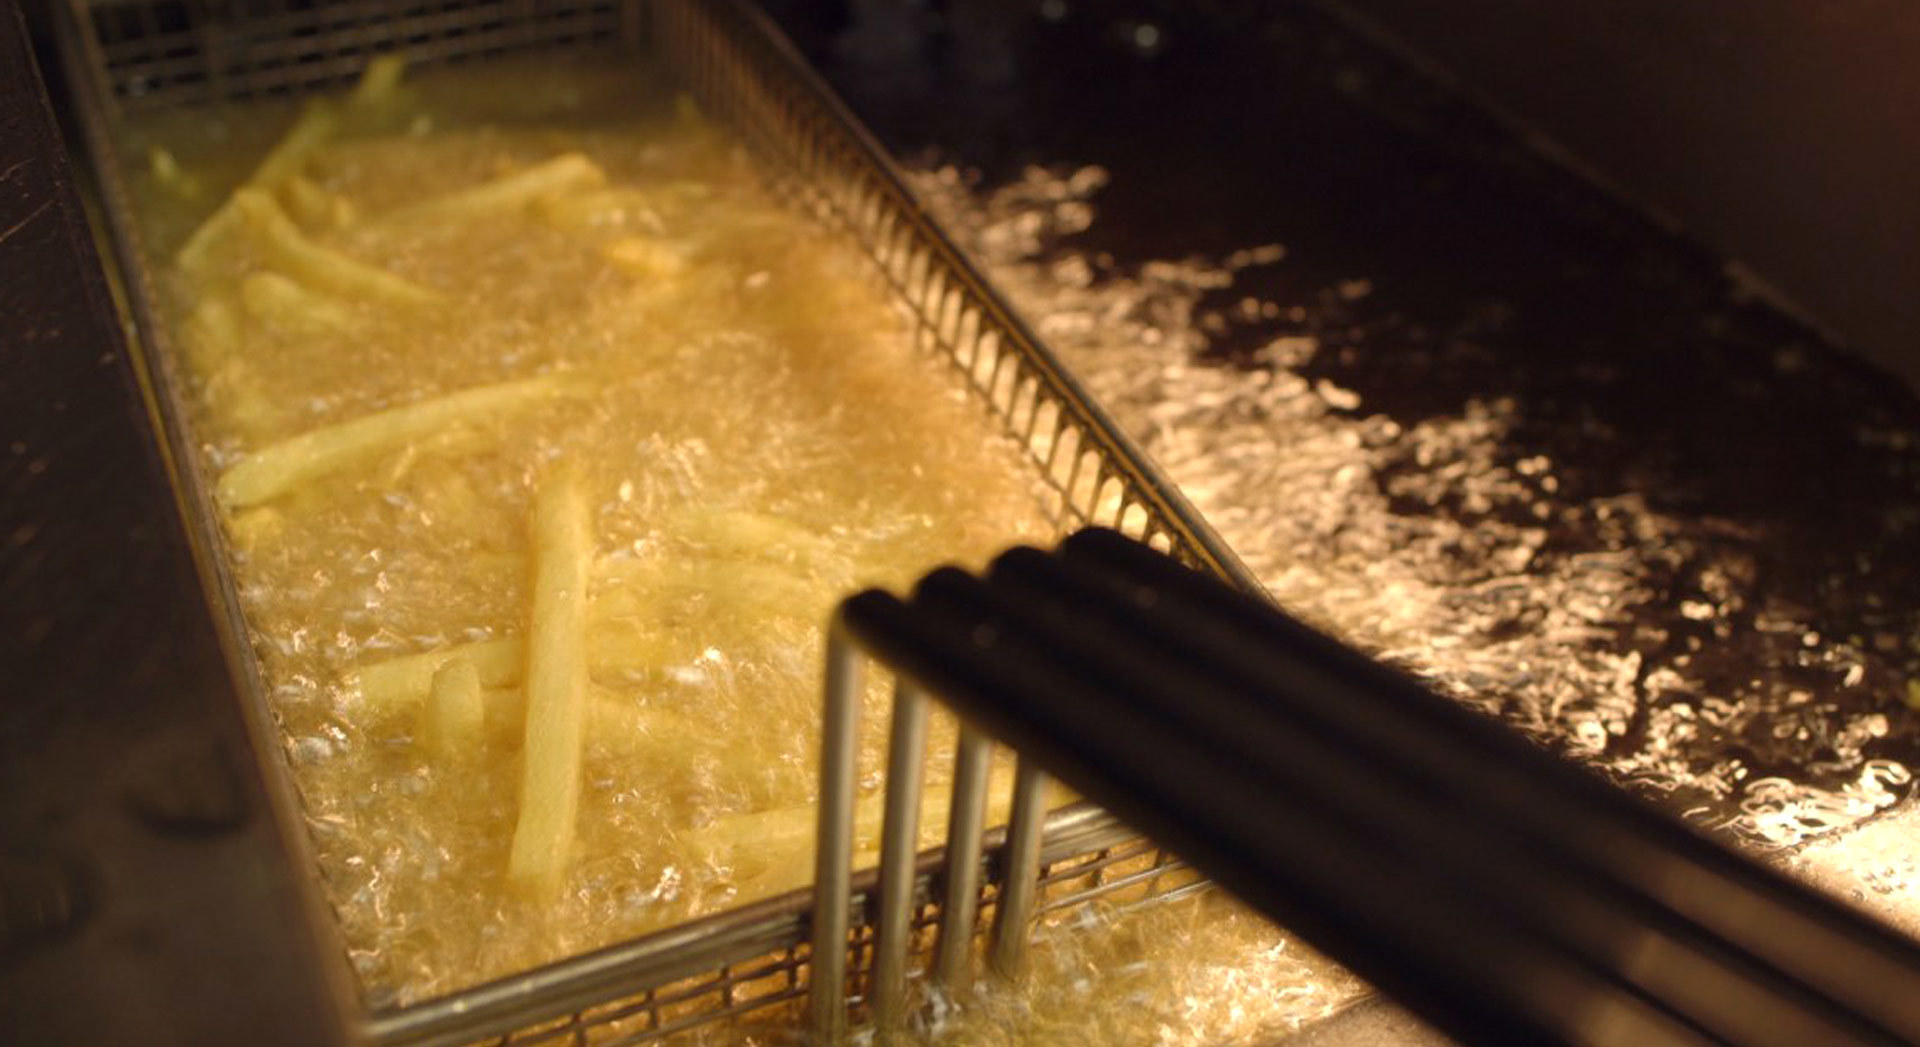 Know Our Food - At what temperature do McDonald's cook their fries and for how long?